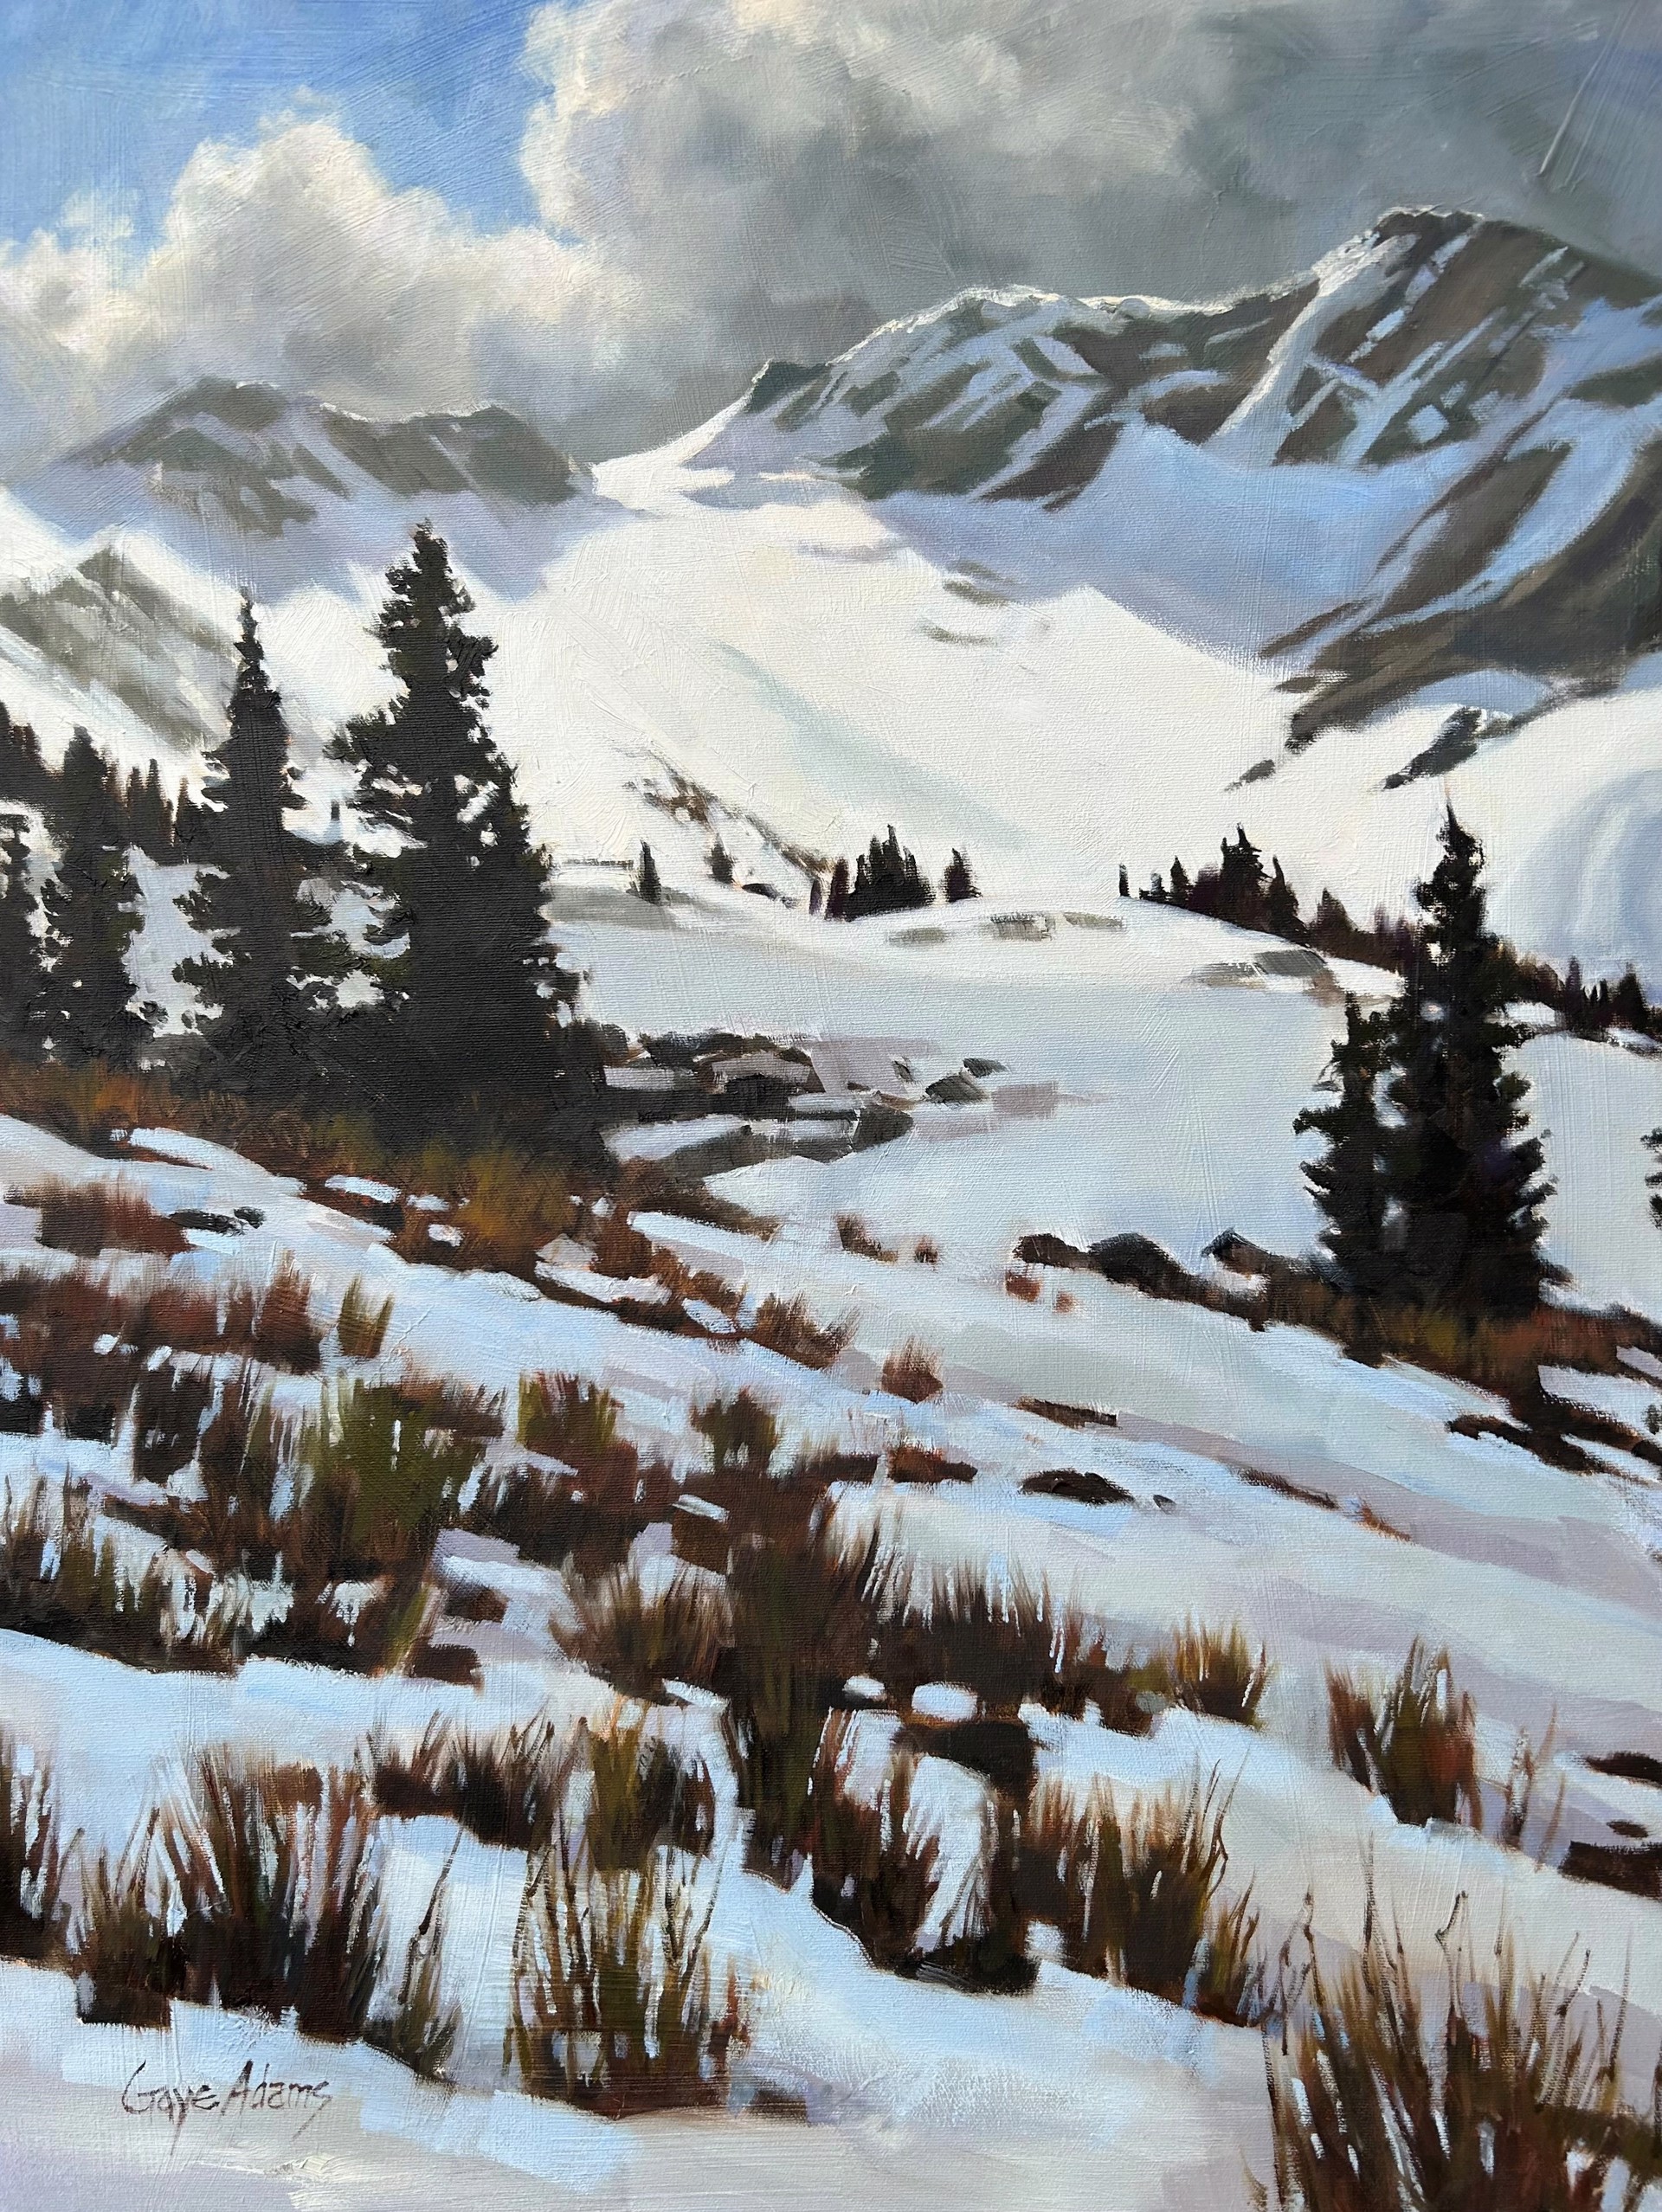 Afternoon Light on Whistler Bowl by GAYE ADAMS